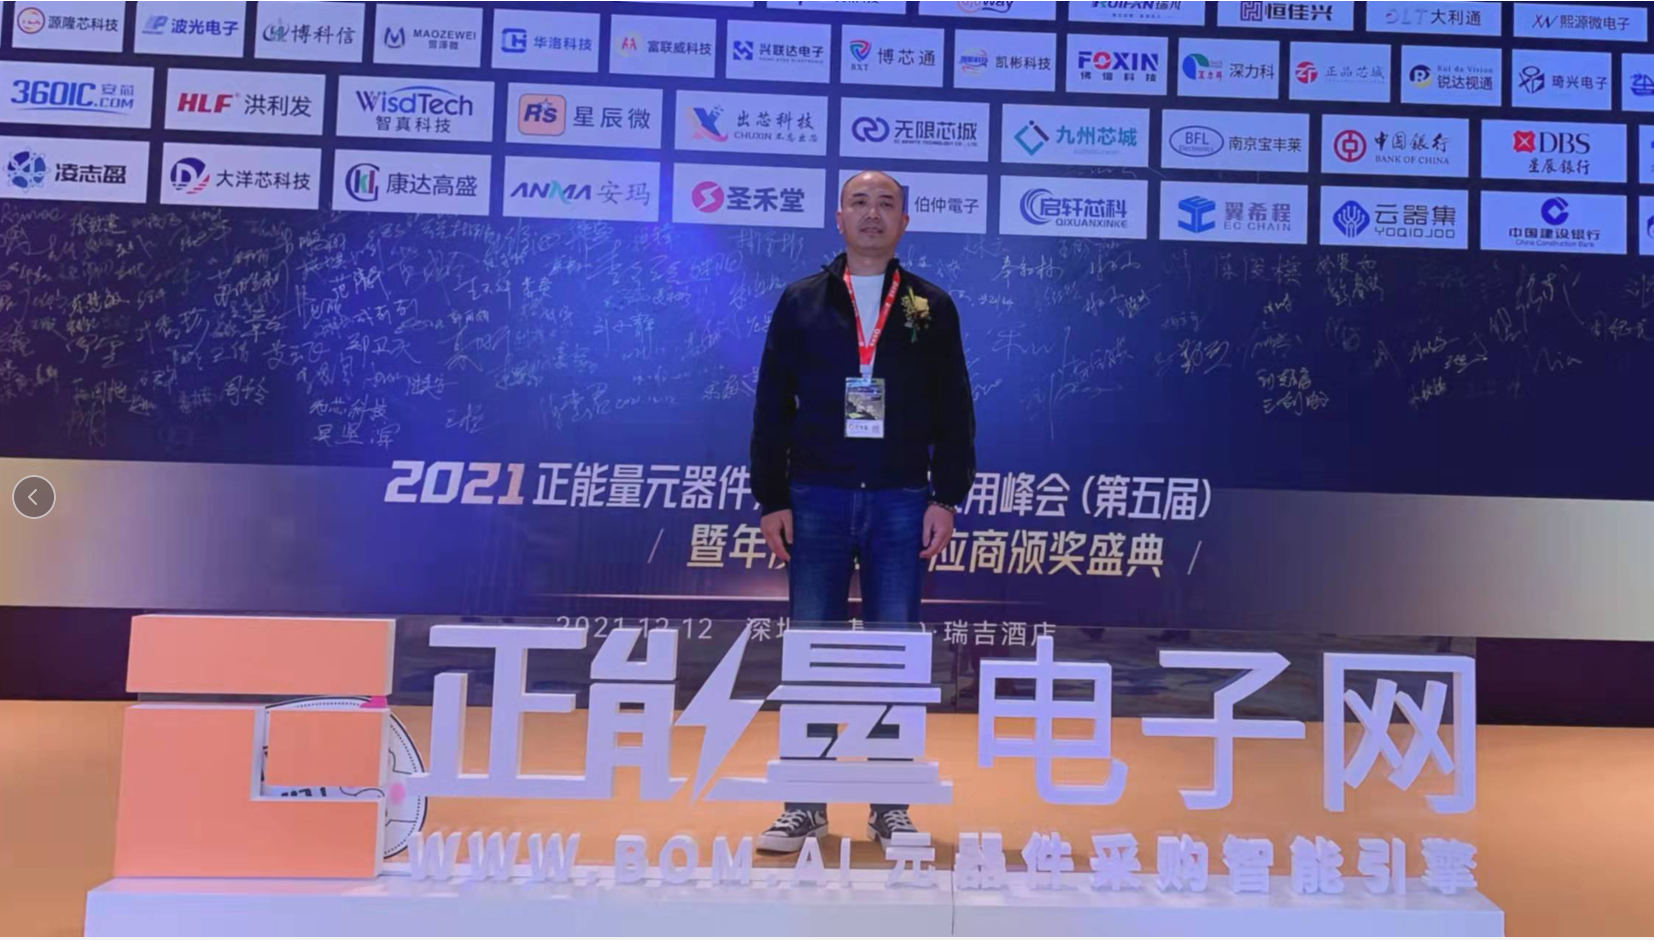 SlkorMicro General Manager Mr. Song Shiqiang at the Positive Energy Summit